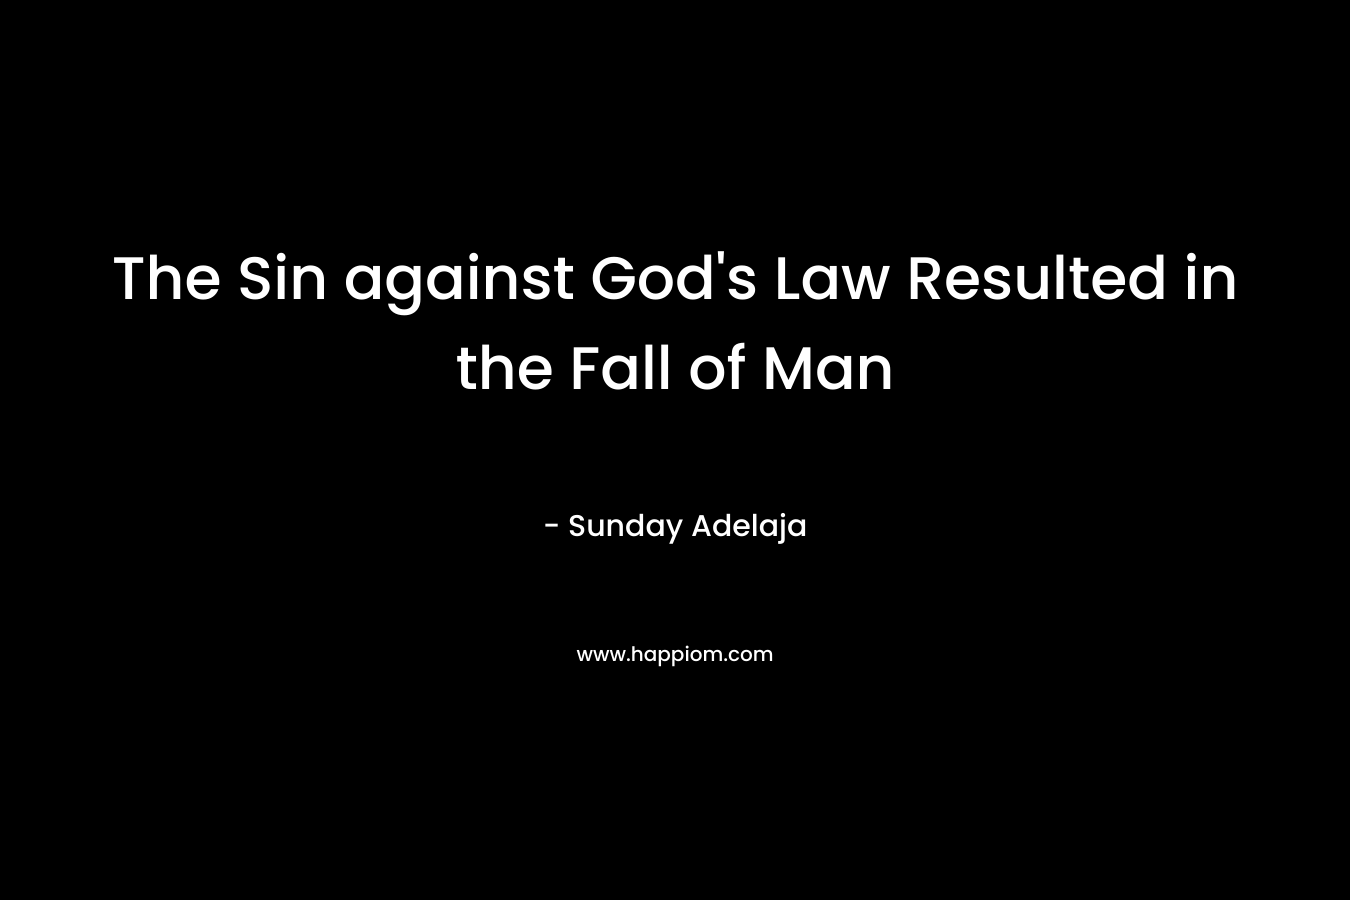 The Sin against God's Law Resulted in the Fall of Man